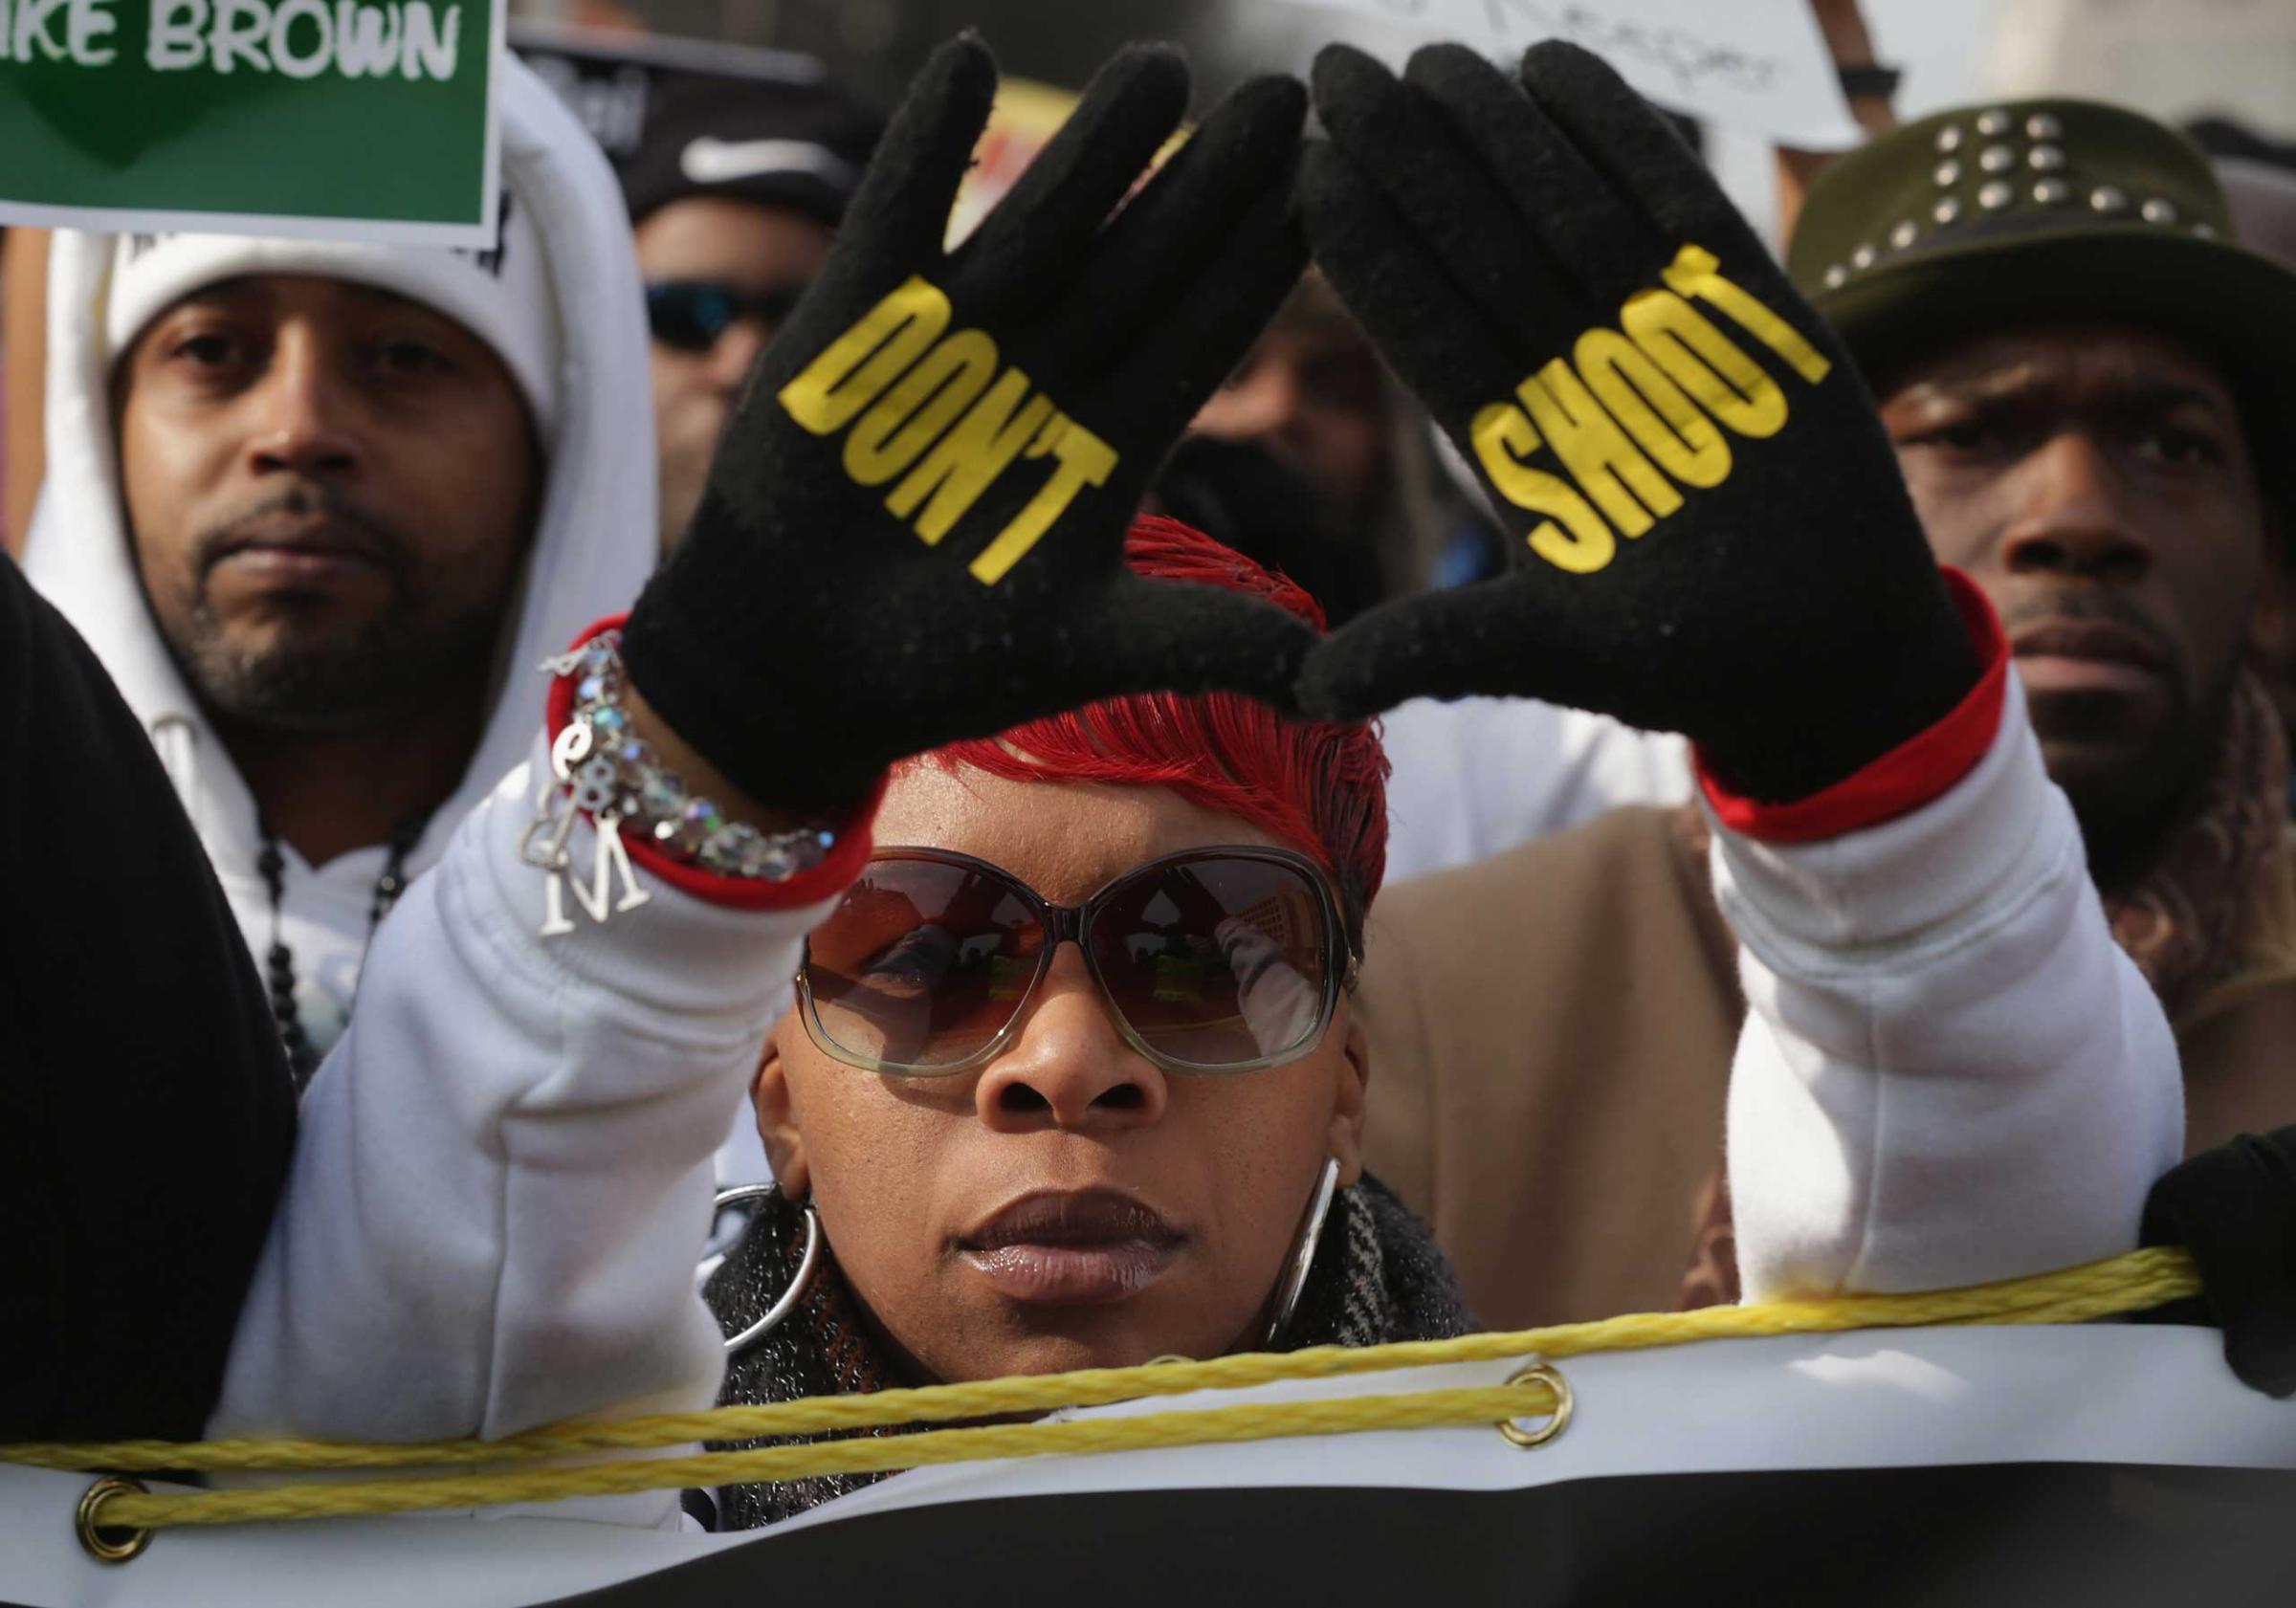 Lesley McSpadden mother Michael Brown helps lead the "Justice For All" rally and march against police brutality on Dec. 13, 2014 in Washington D.C.